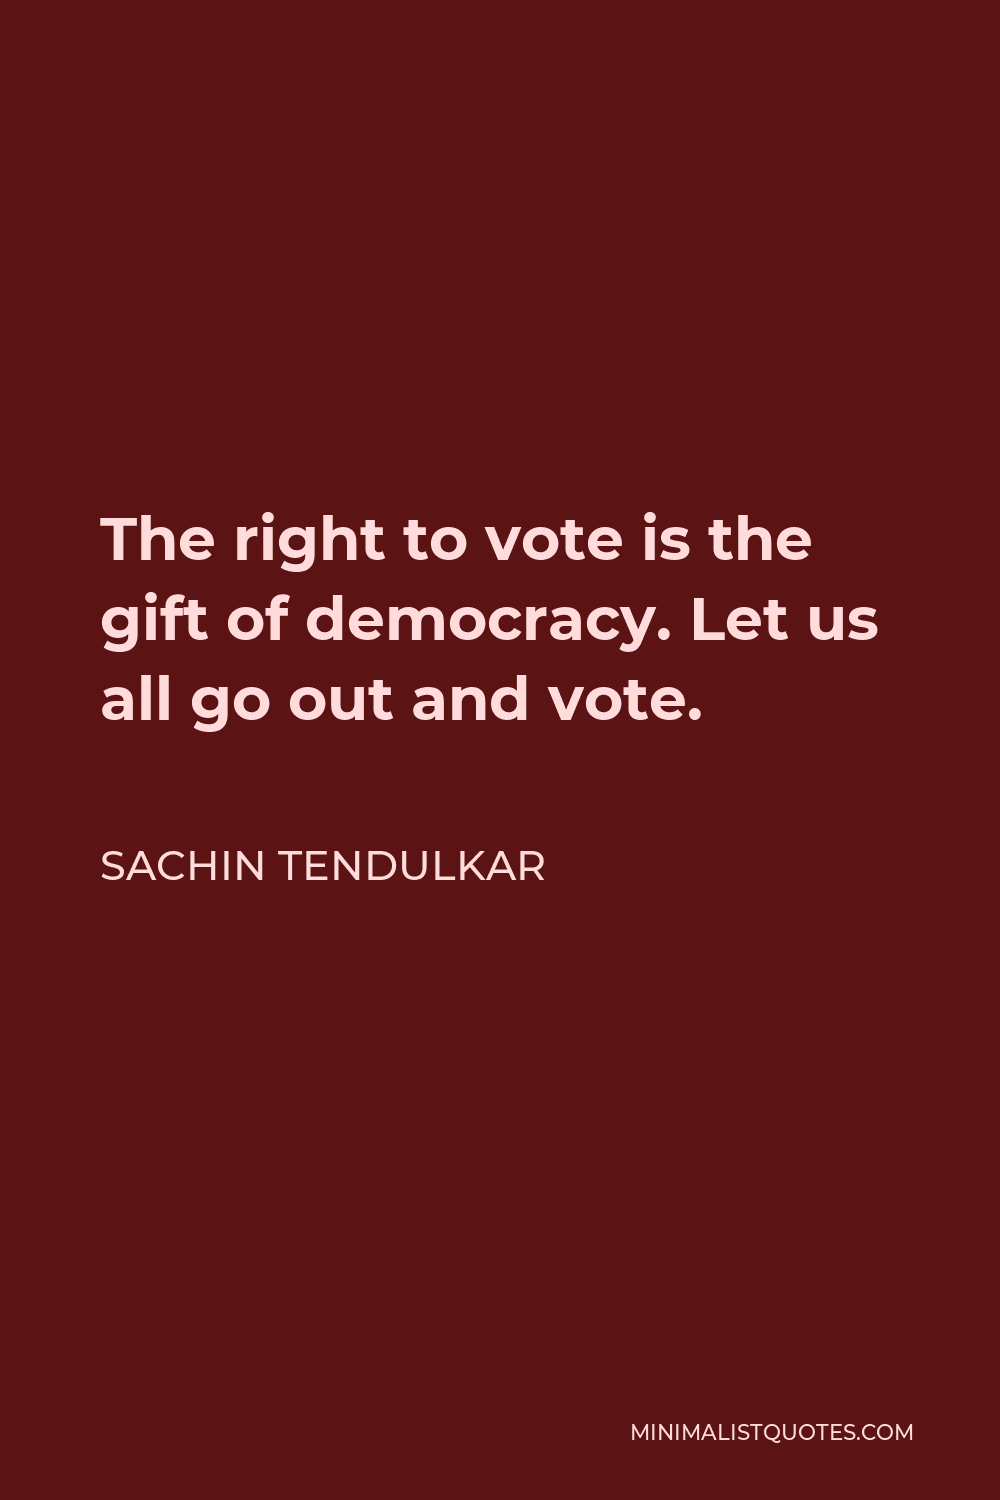 Sachin Tendulkar Quote - The right to vote is the gift of democracy. Let us all go out and vote.